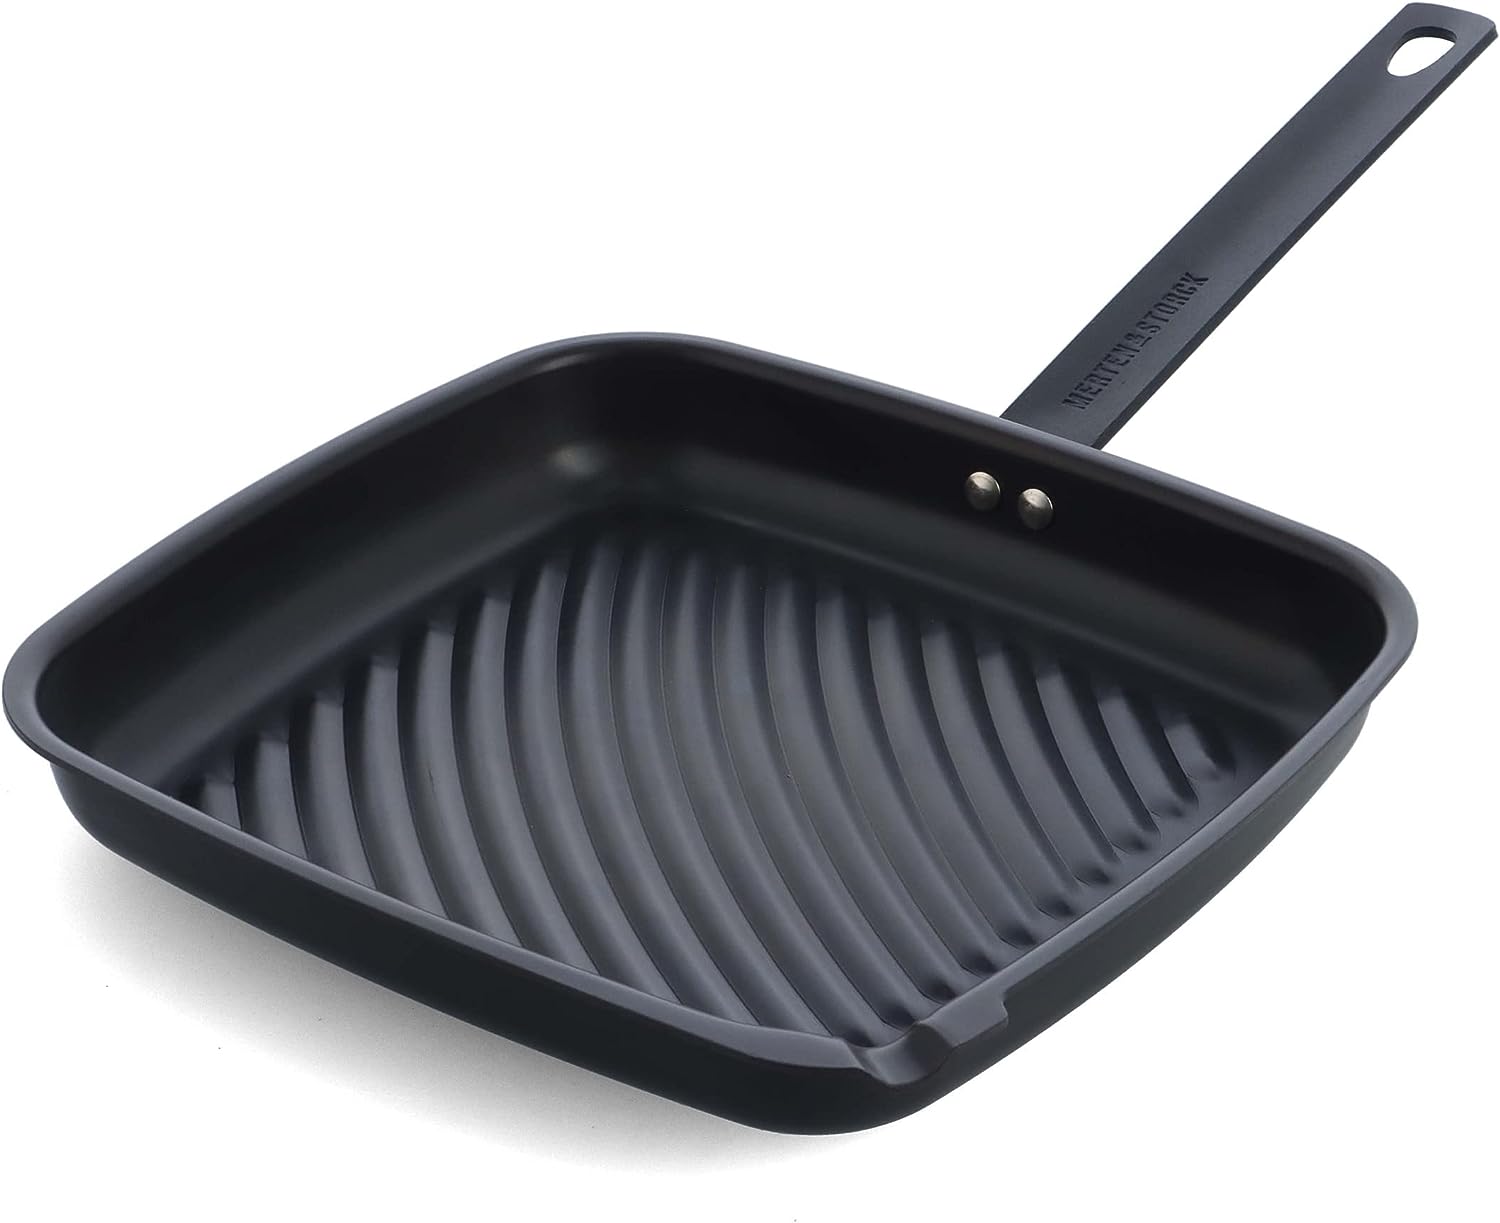 Merten & Storck Pre-Seasoned Carbon Steel Square Grill Pan, Lightweight and  Durable, Sear Grill Broil Fry, Induction, Steel Handle